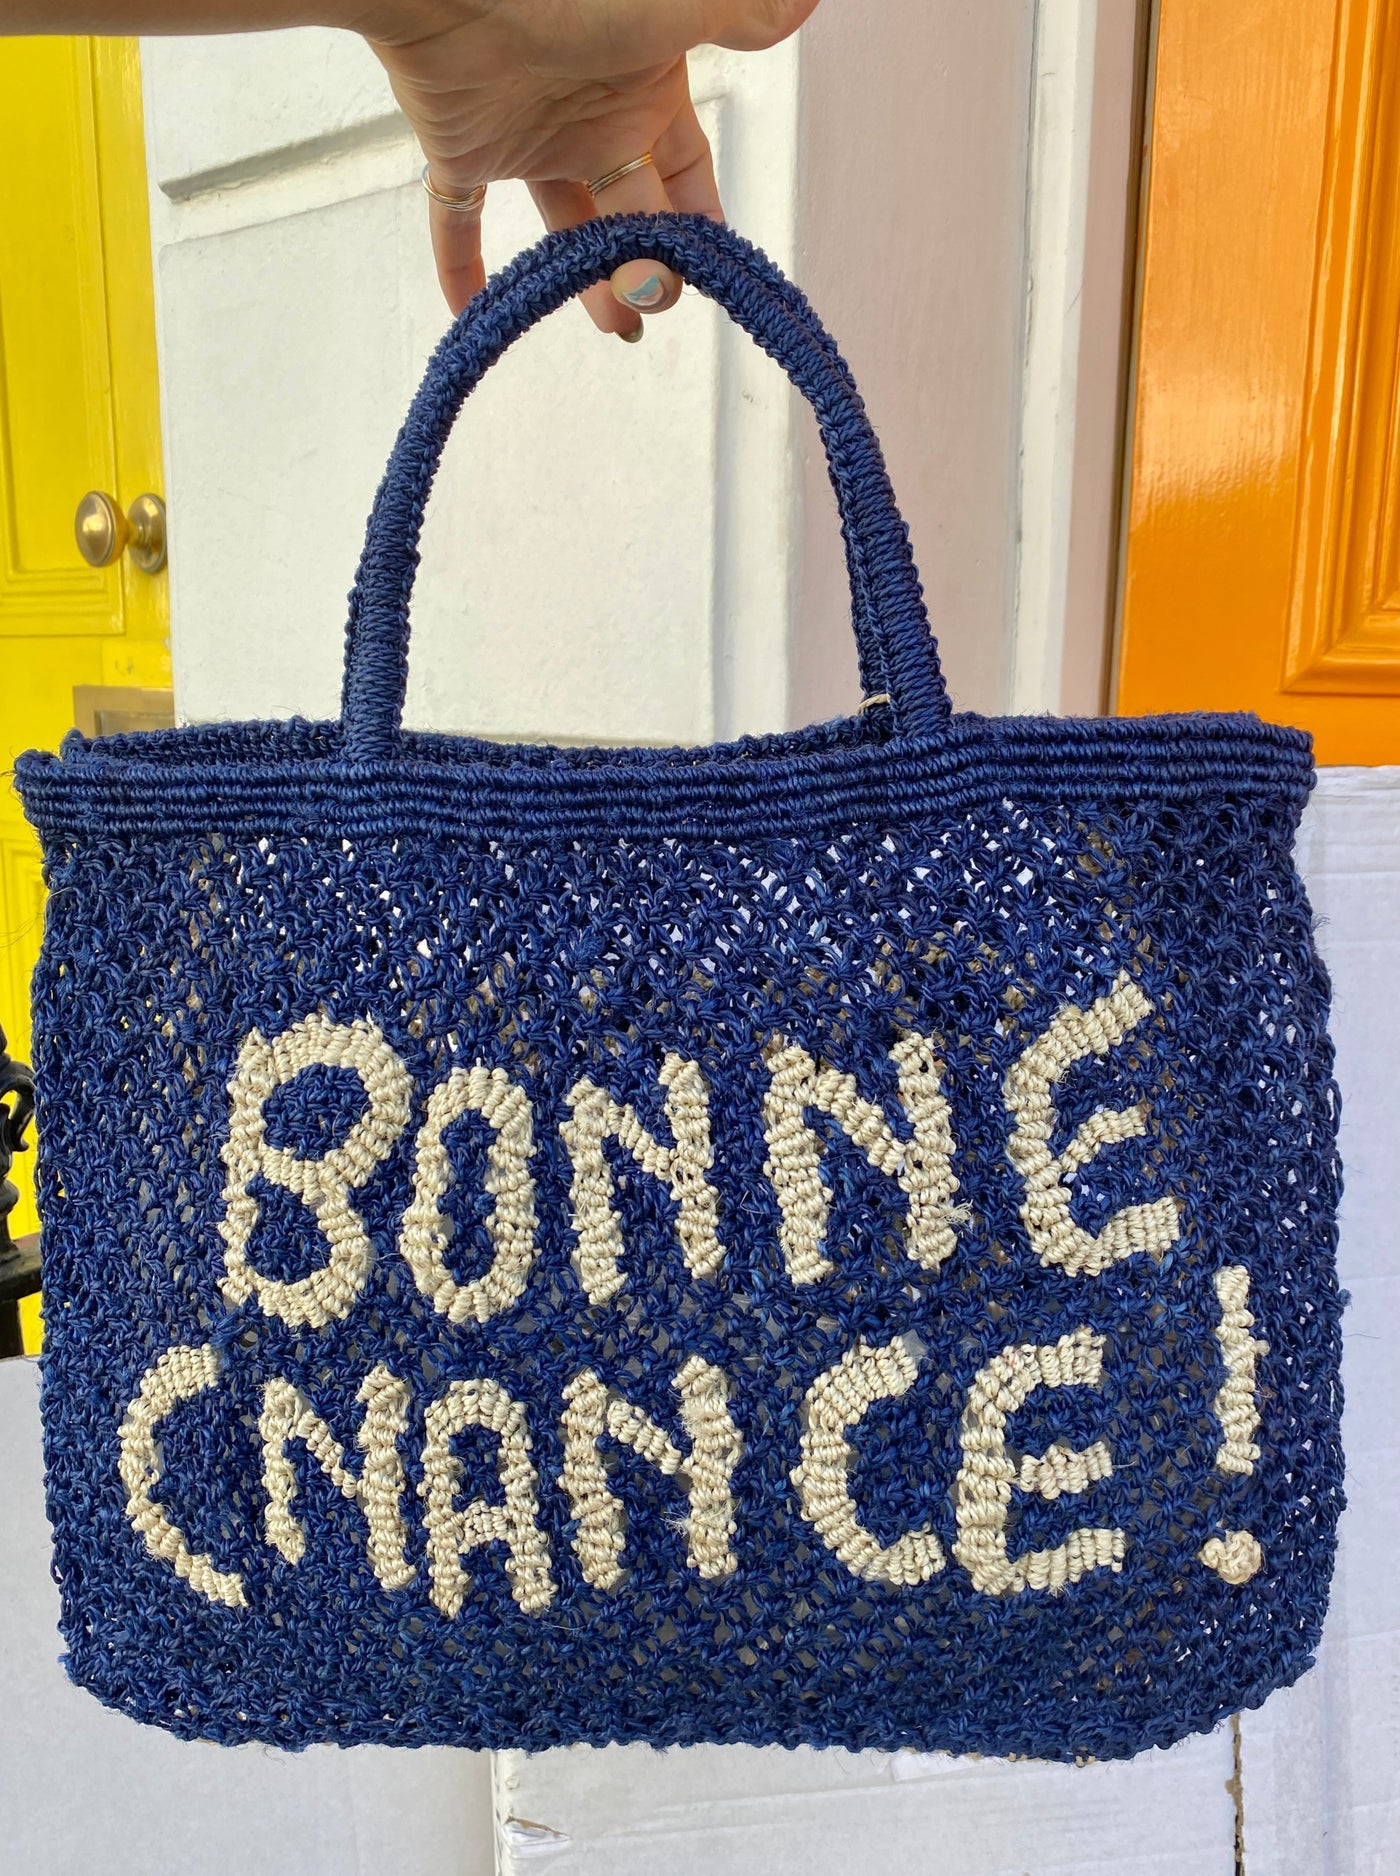 Bonne Chance - Navy with natural